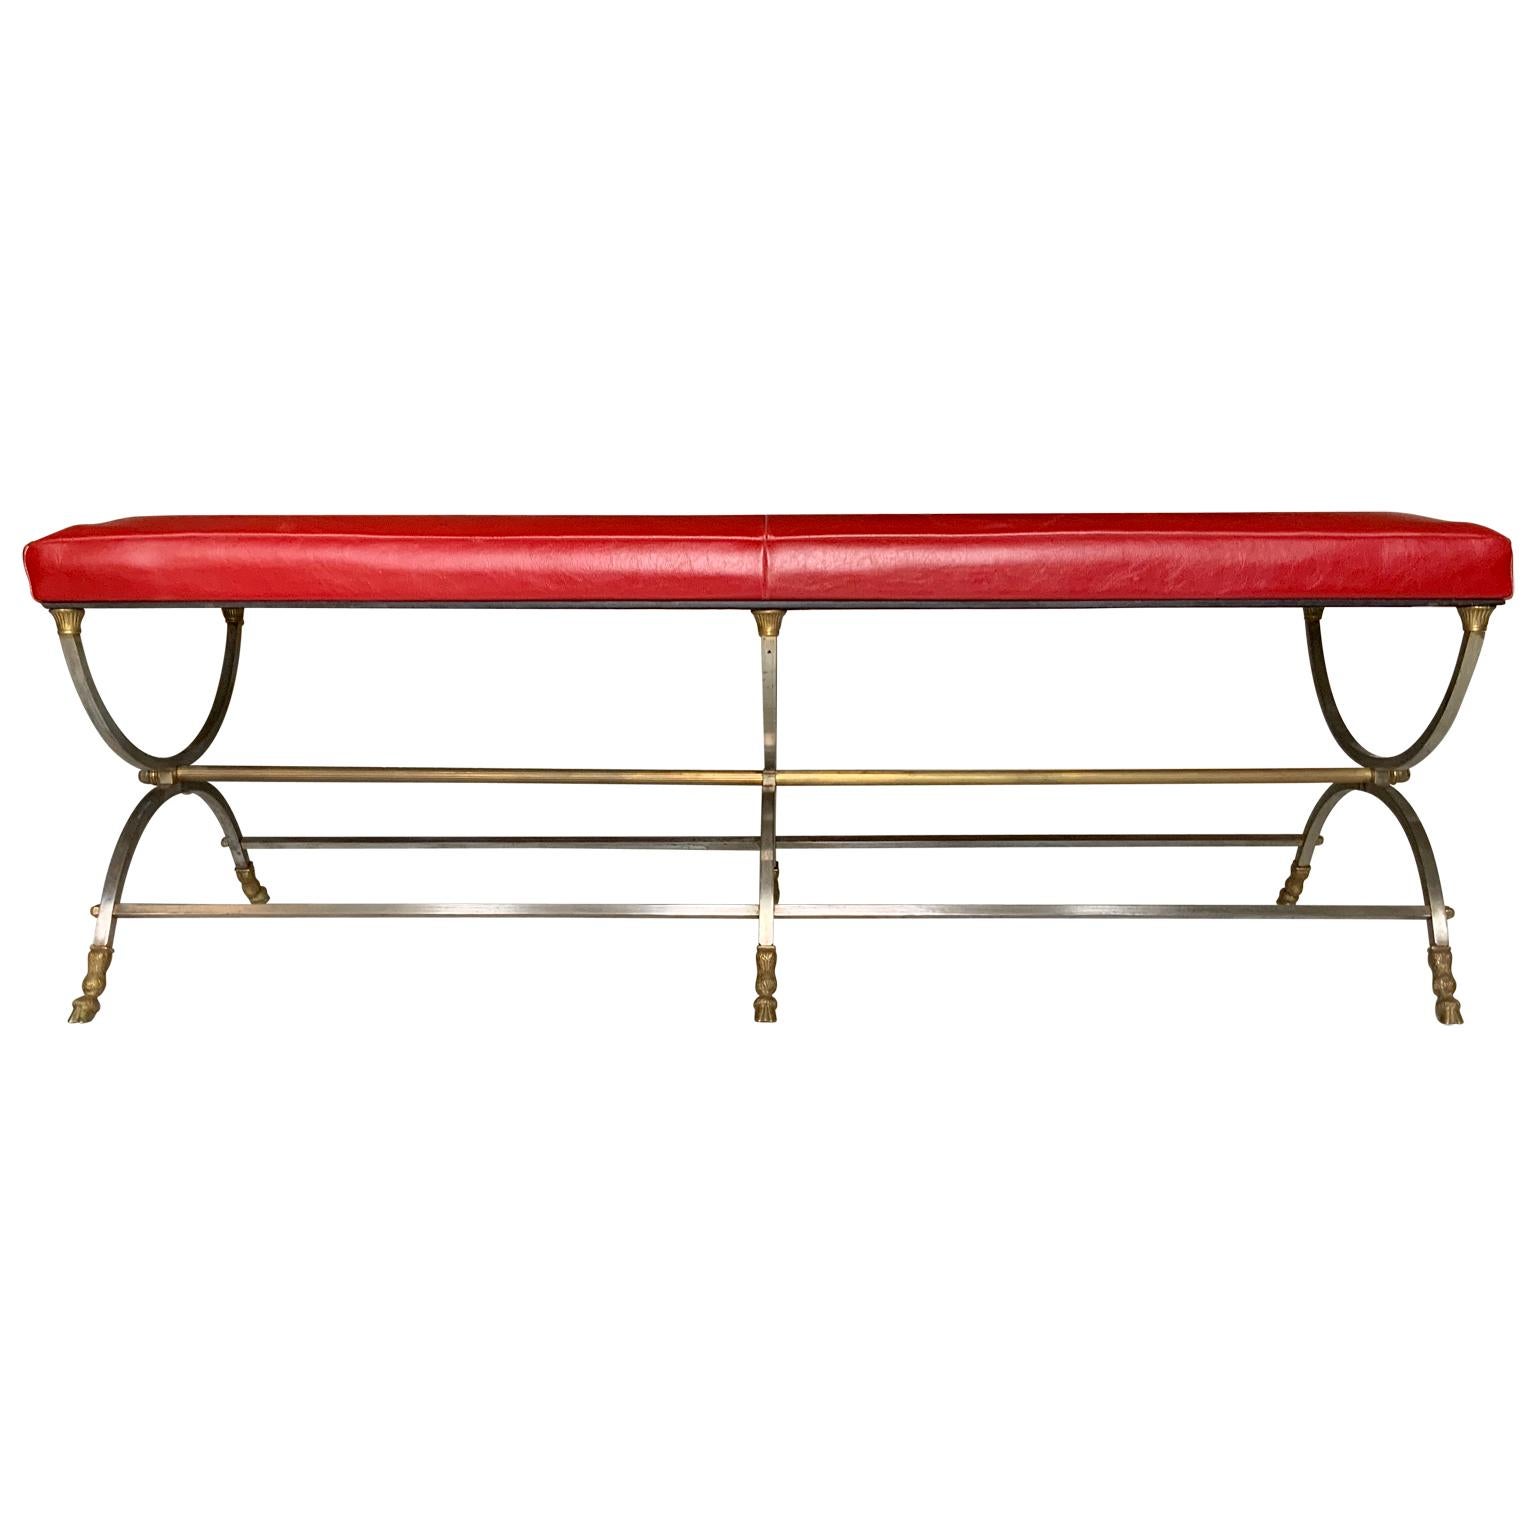 Maison Jansen neoclassical bronze and steel bench in red leather upholstery

A Maison Jansen neoclassical bronze and steel long bench. Great form, hoof feet, and vintage red leather in beautiful condition. Very unusual, original bench form. A real